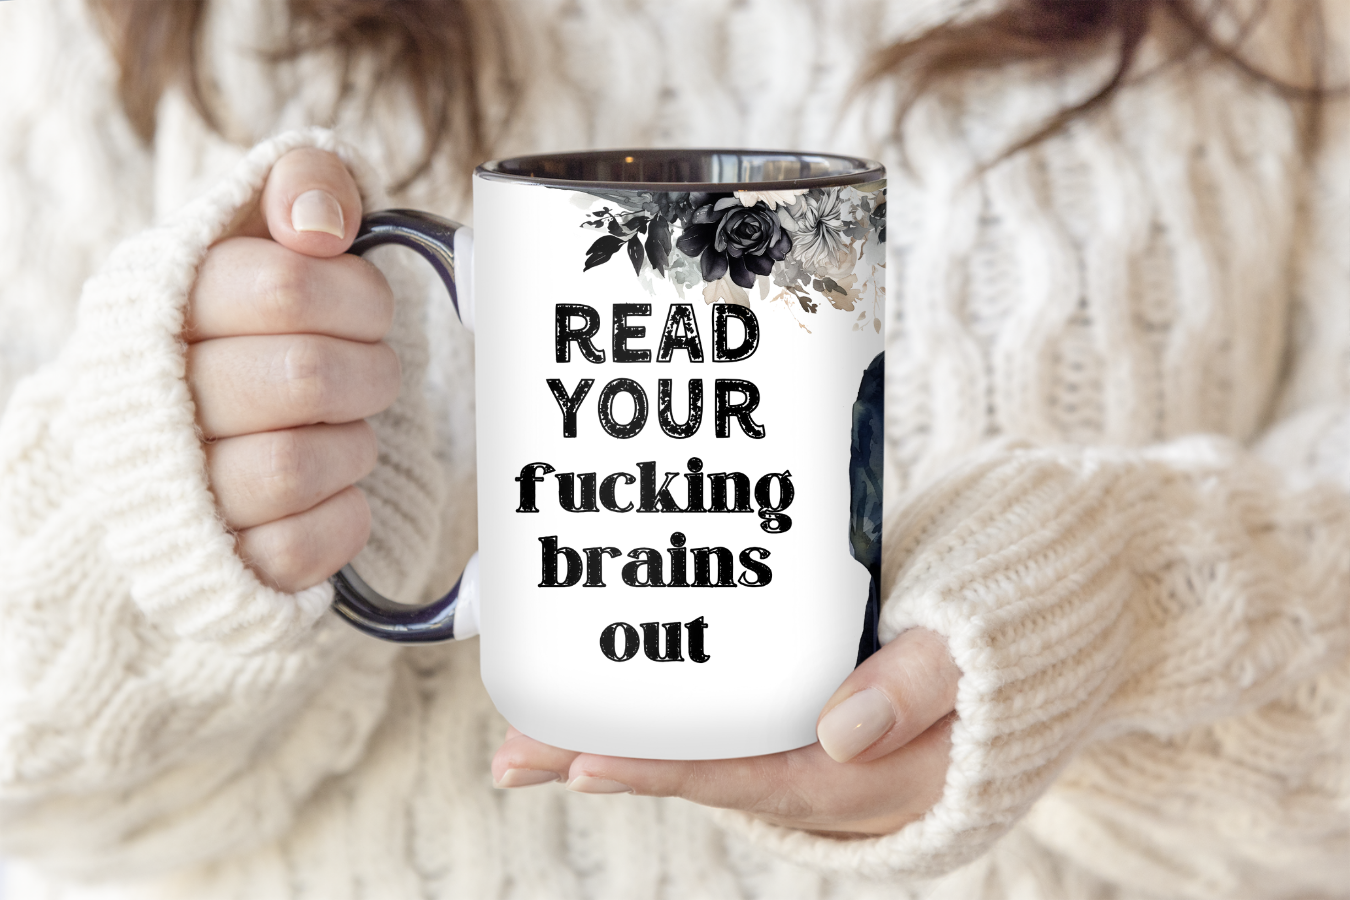 Read Your Fucking Brains Out | Mug - The Pretty Things.ca